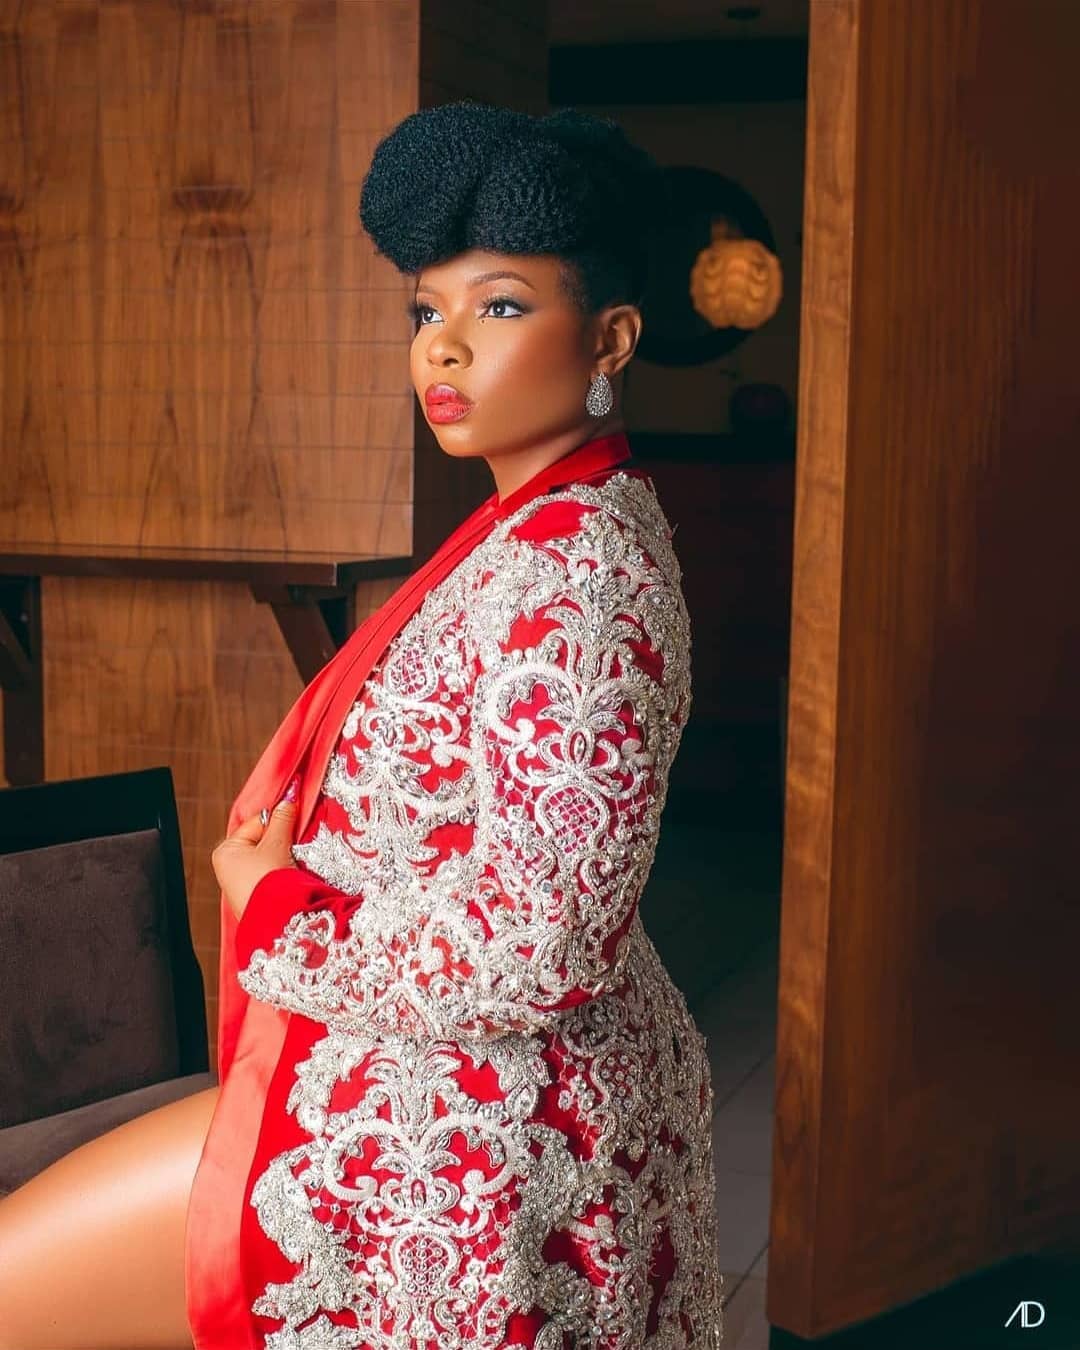 Drama as Yemi Alade mistakenly interacts with fake Wizkid page